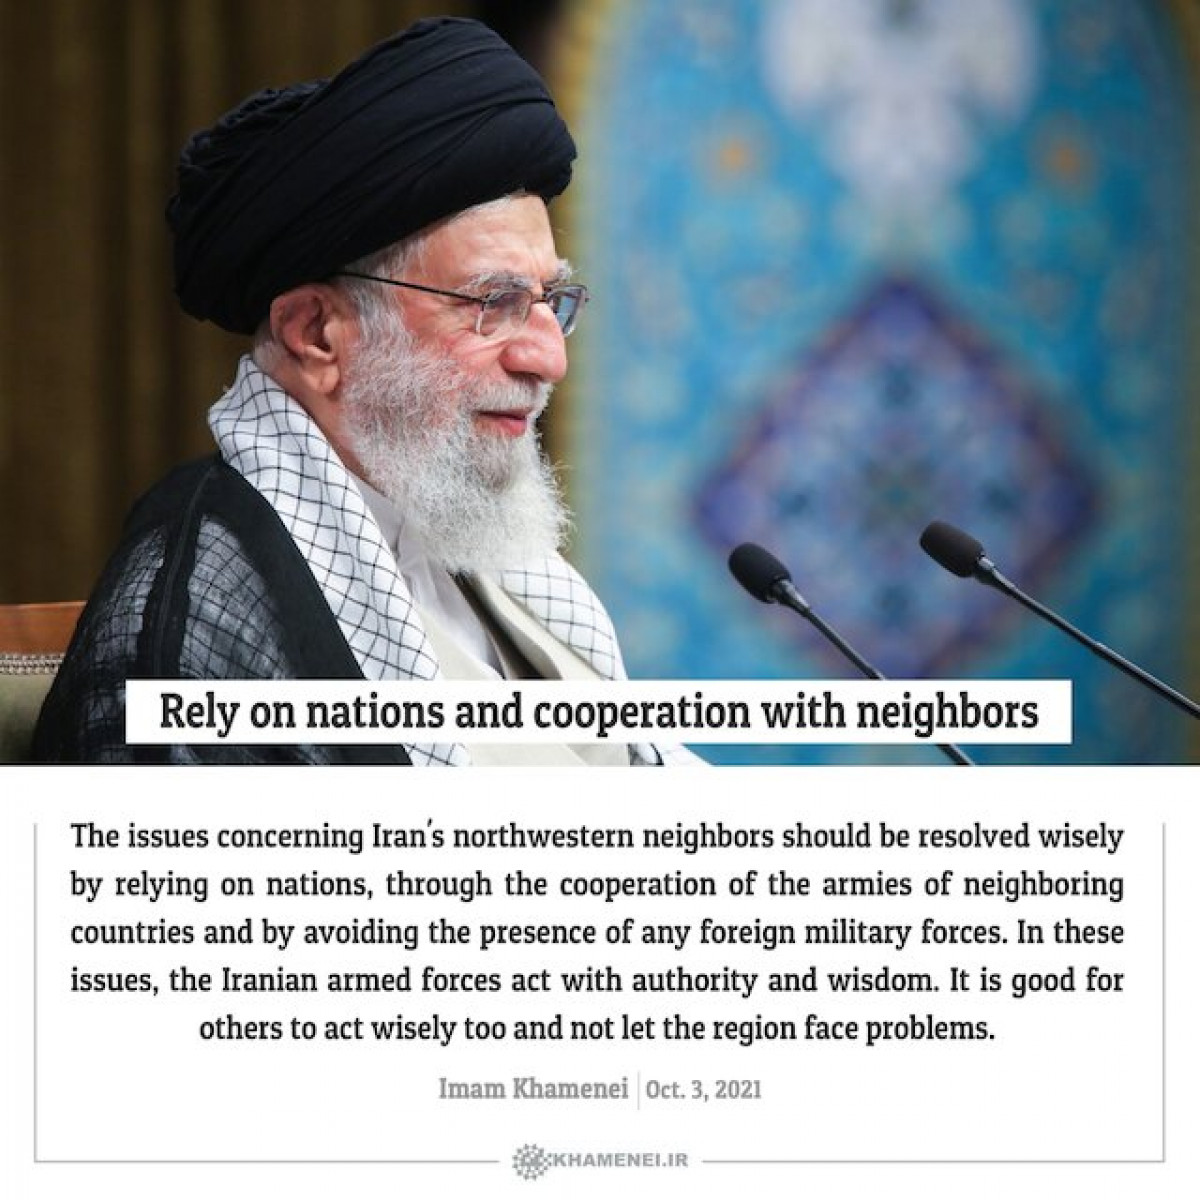 Collection of posters: Rely on nations and cooperation with neighbors